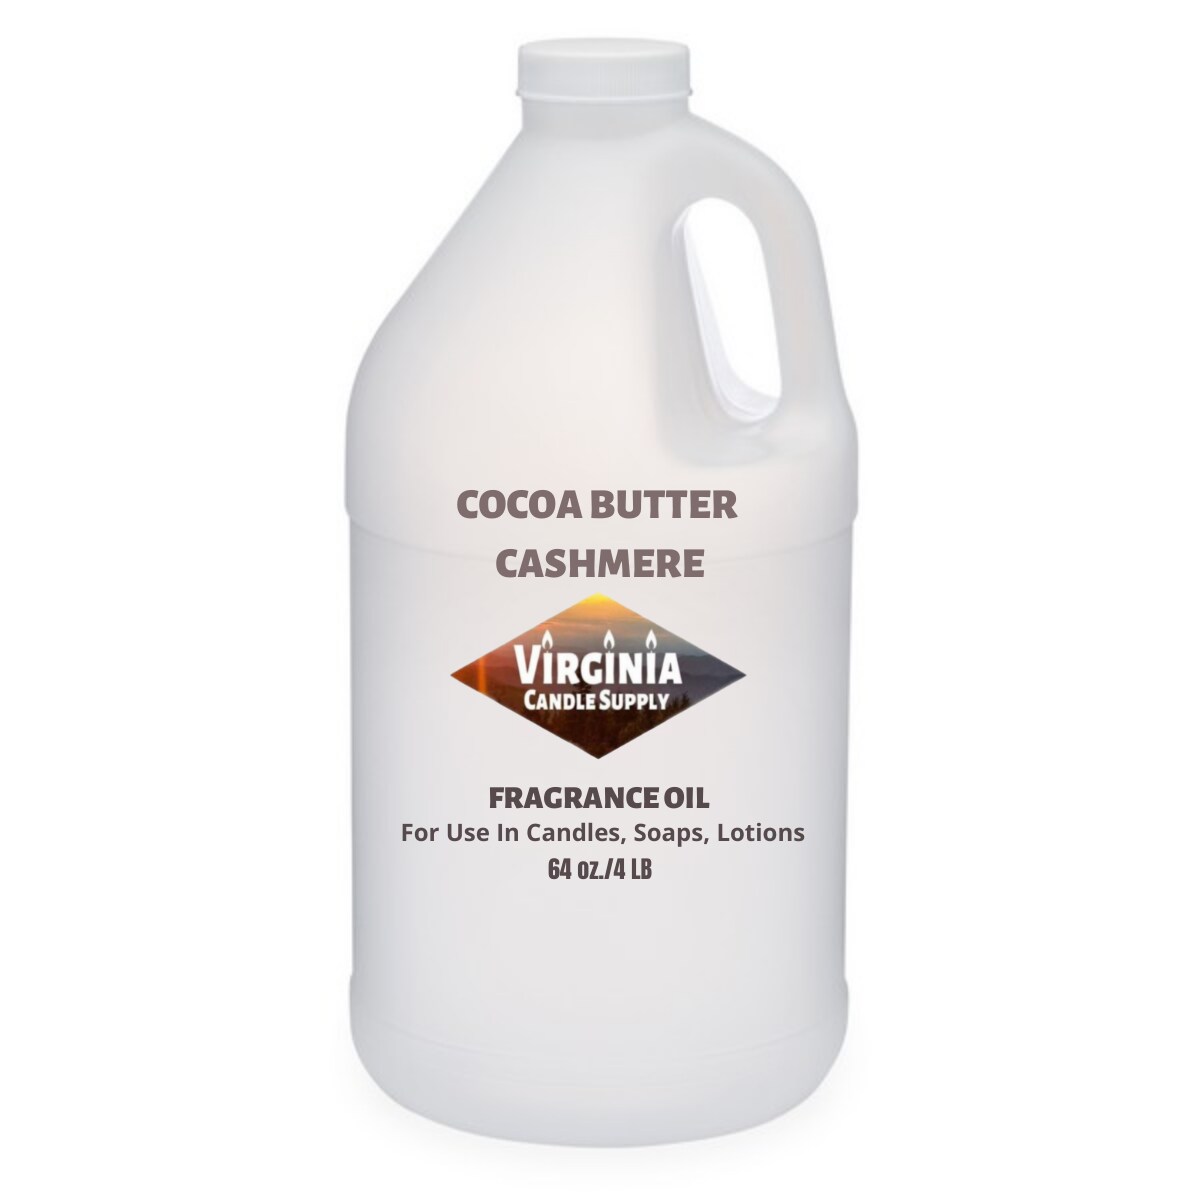 Cocoa Butter Cashmere Fragrance Oil (Our Version of the Brand Name) (64 oz  Jug) for Candle Making, Soap Making, Tart Making, Room Sprays, Lotions, Car  Fresheners, Slime, Bath Bombs, Warmers…